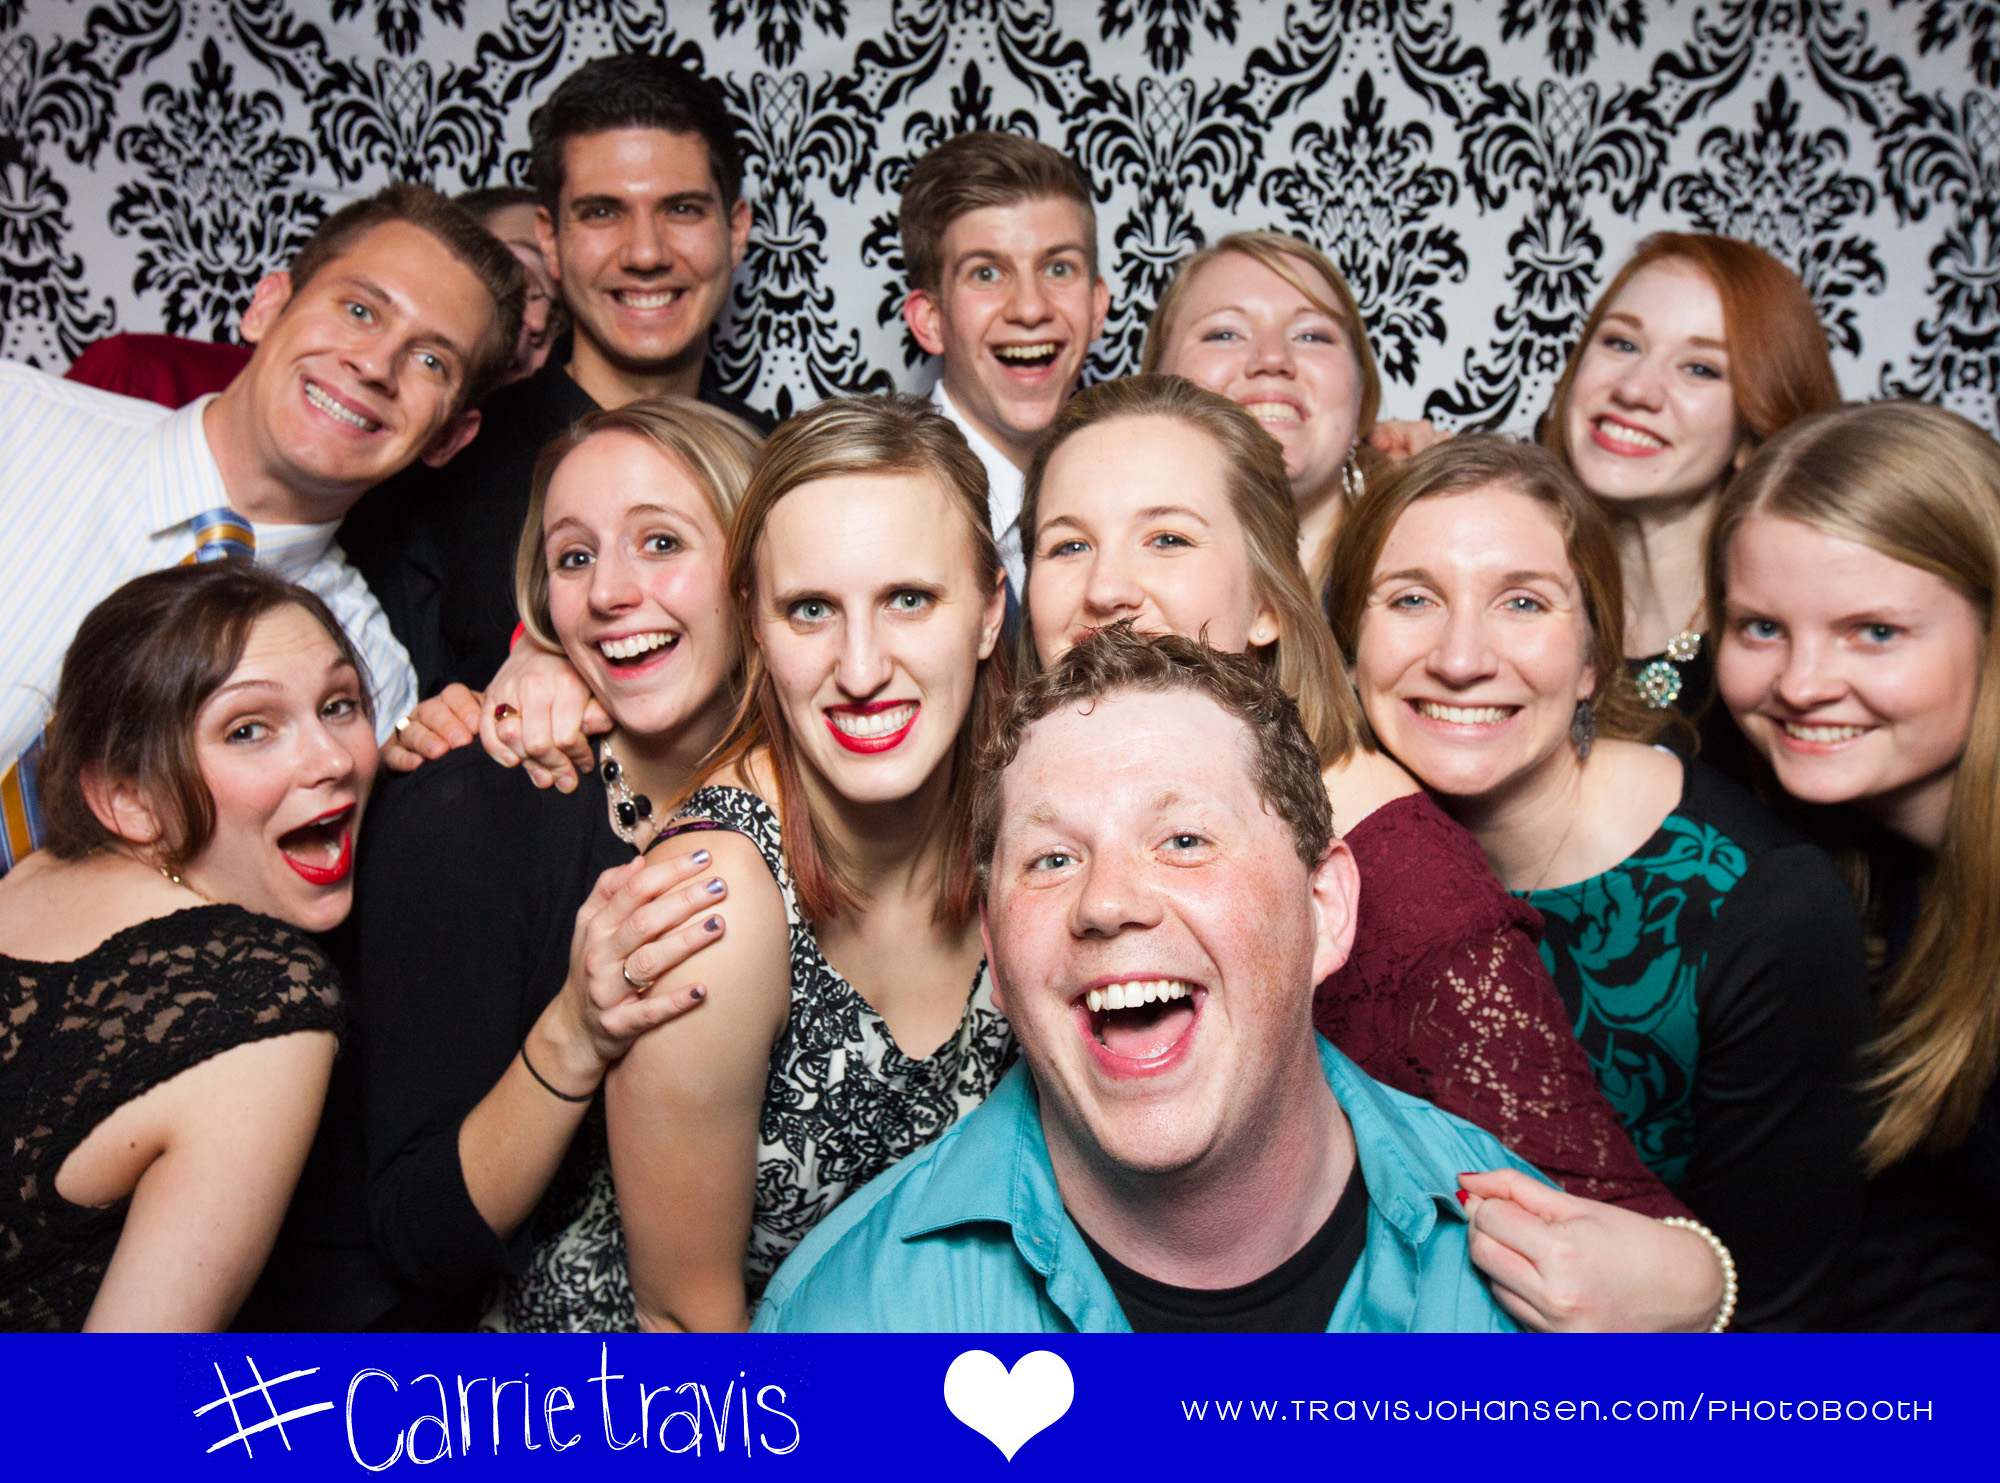 Group friendly photobooth MN based